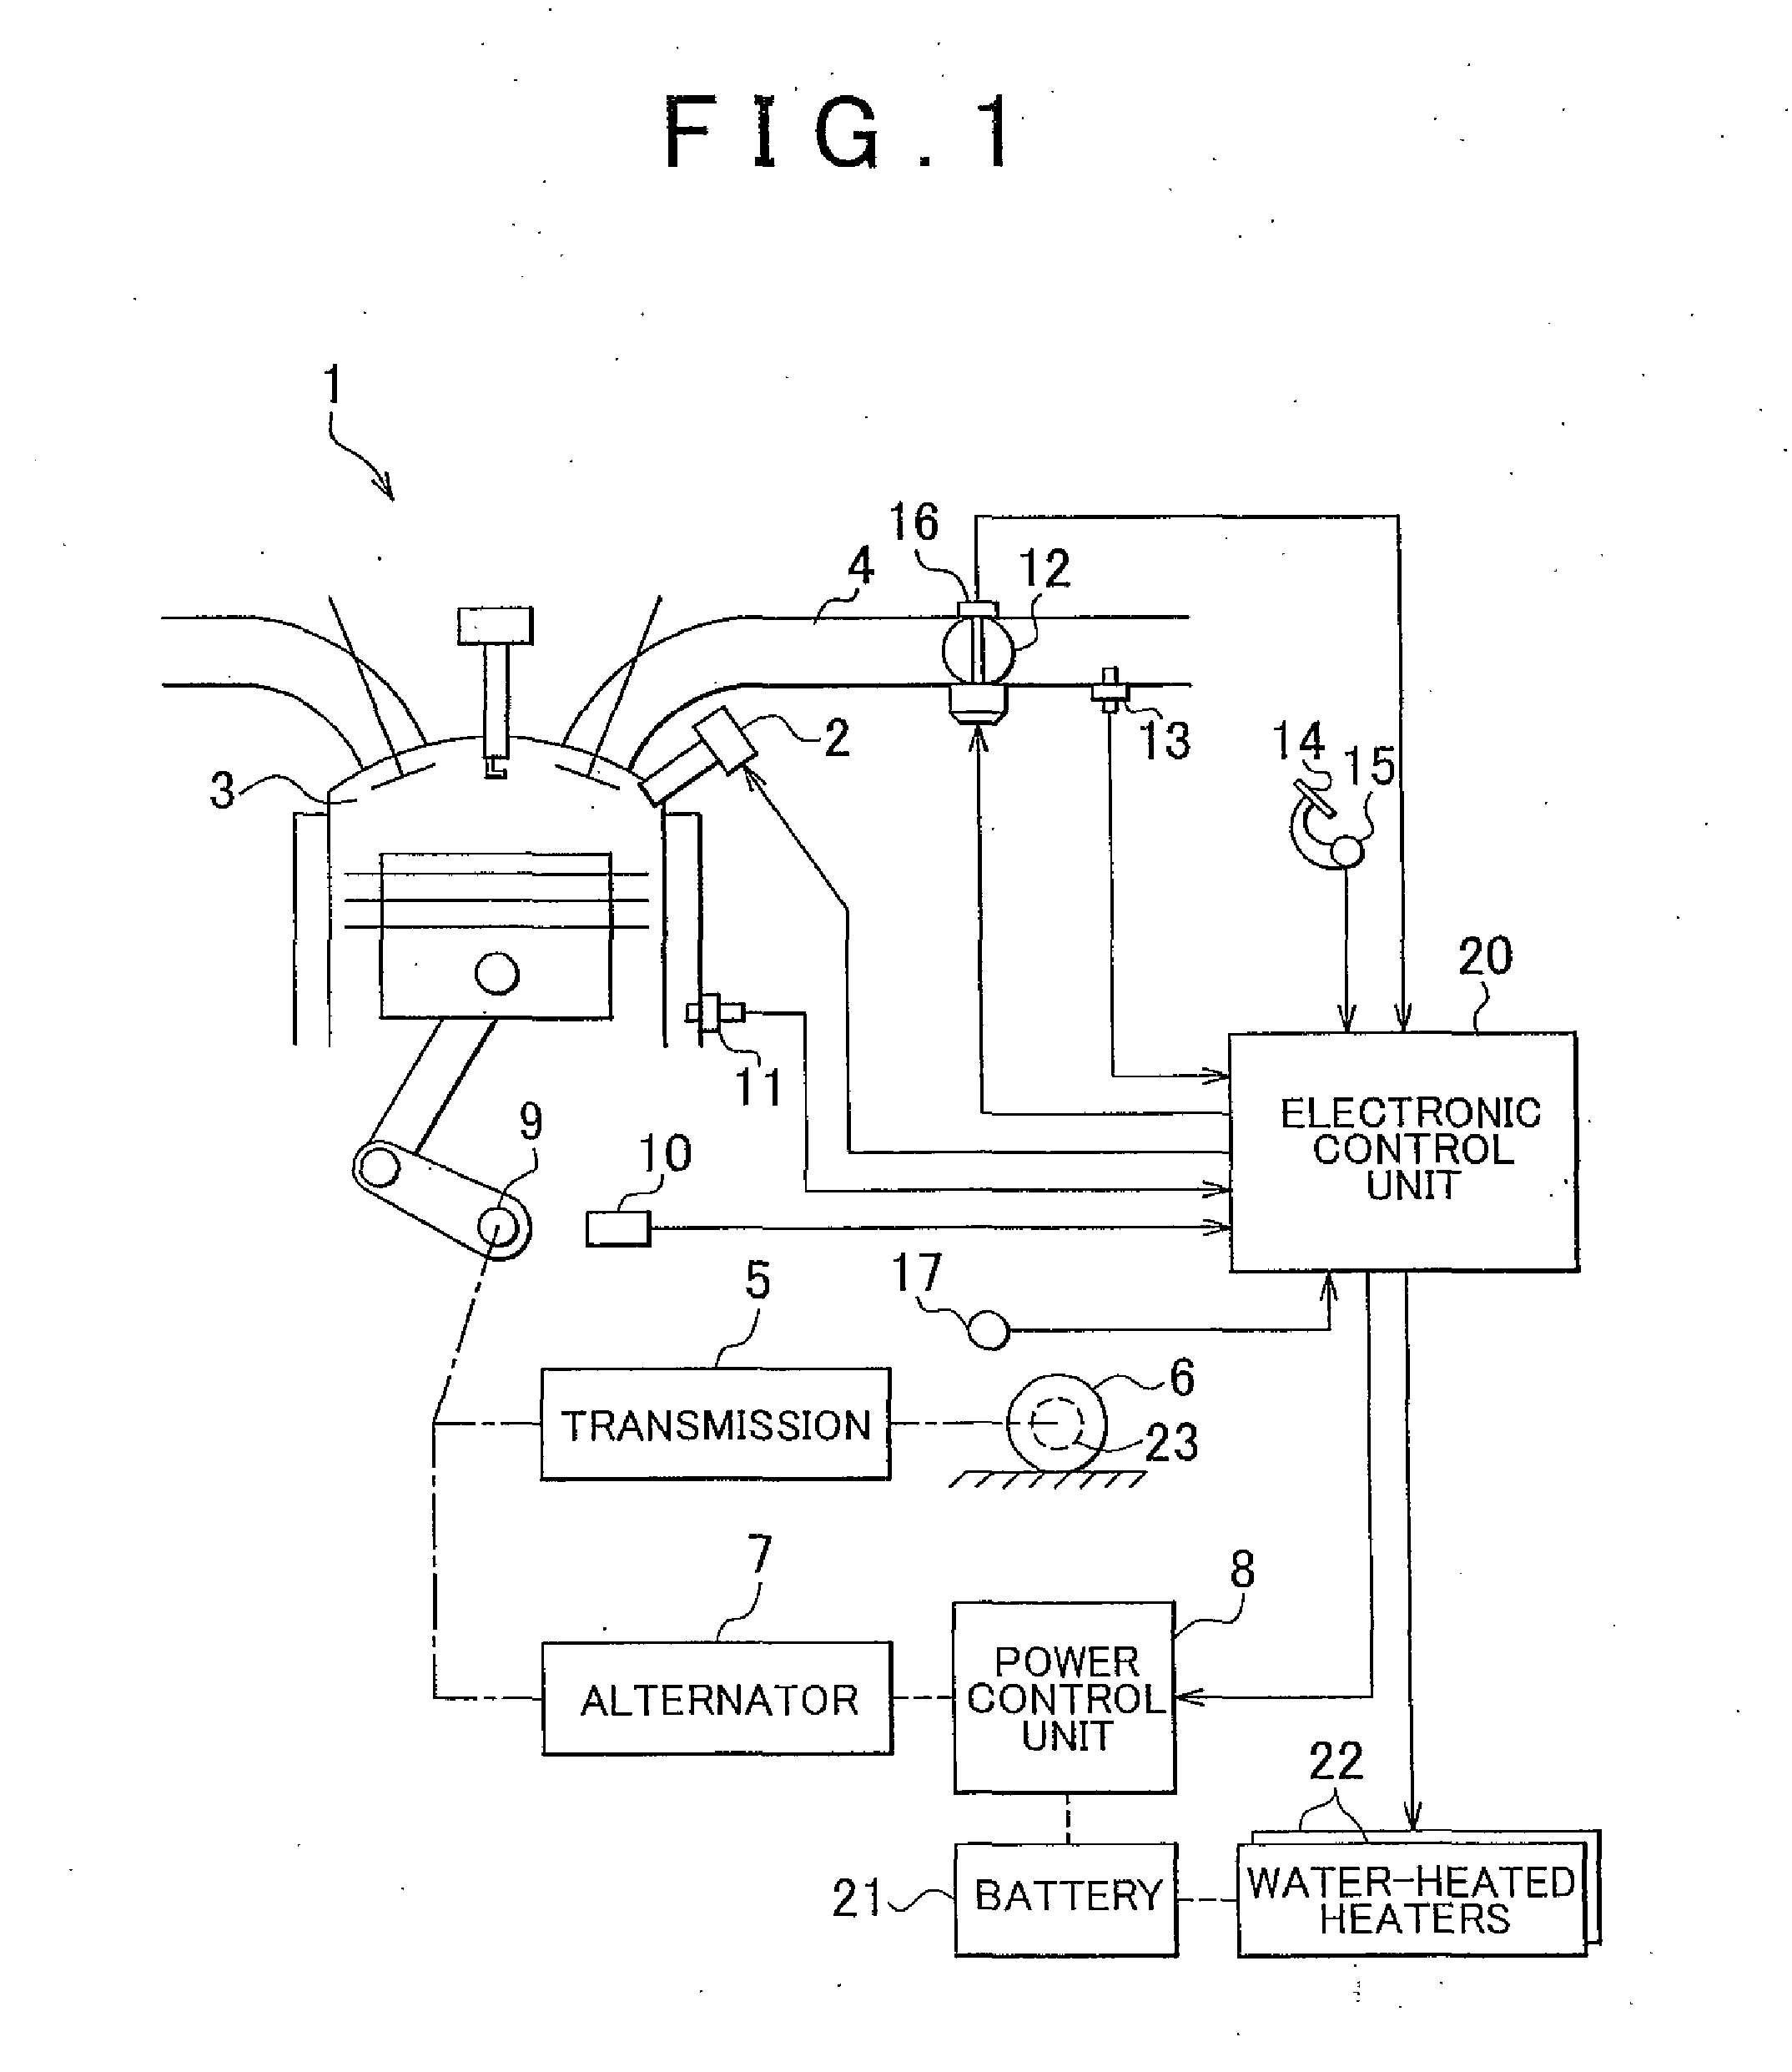 Control apparatus and method of controlling internal combustion engine mounted on vehicle